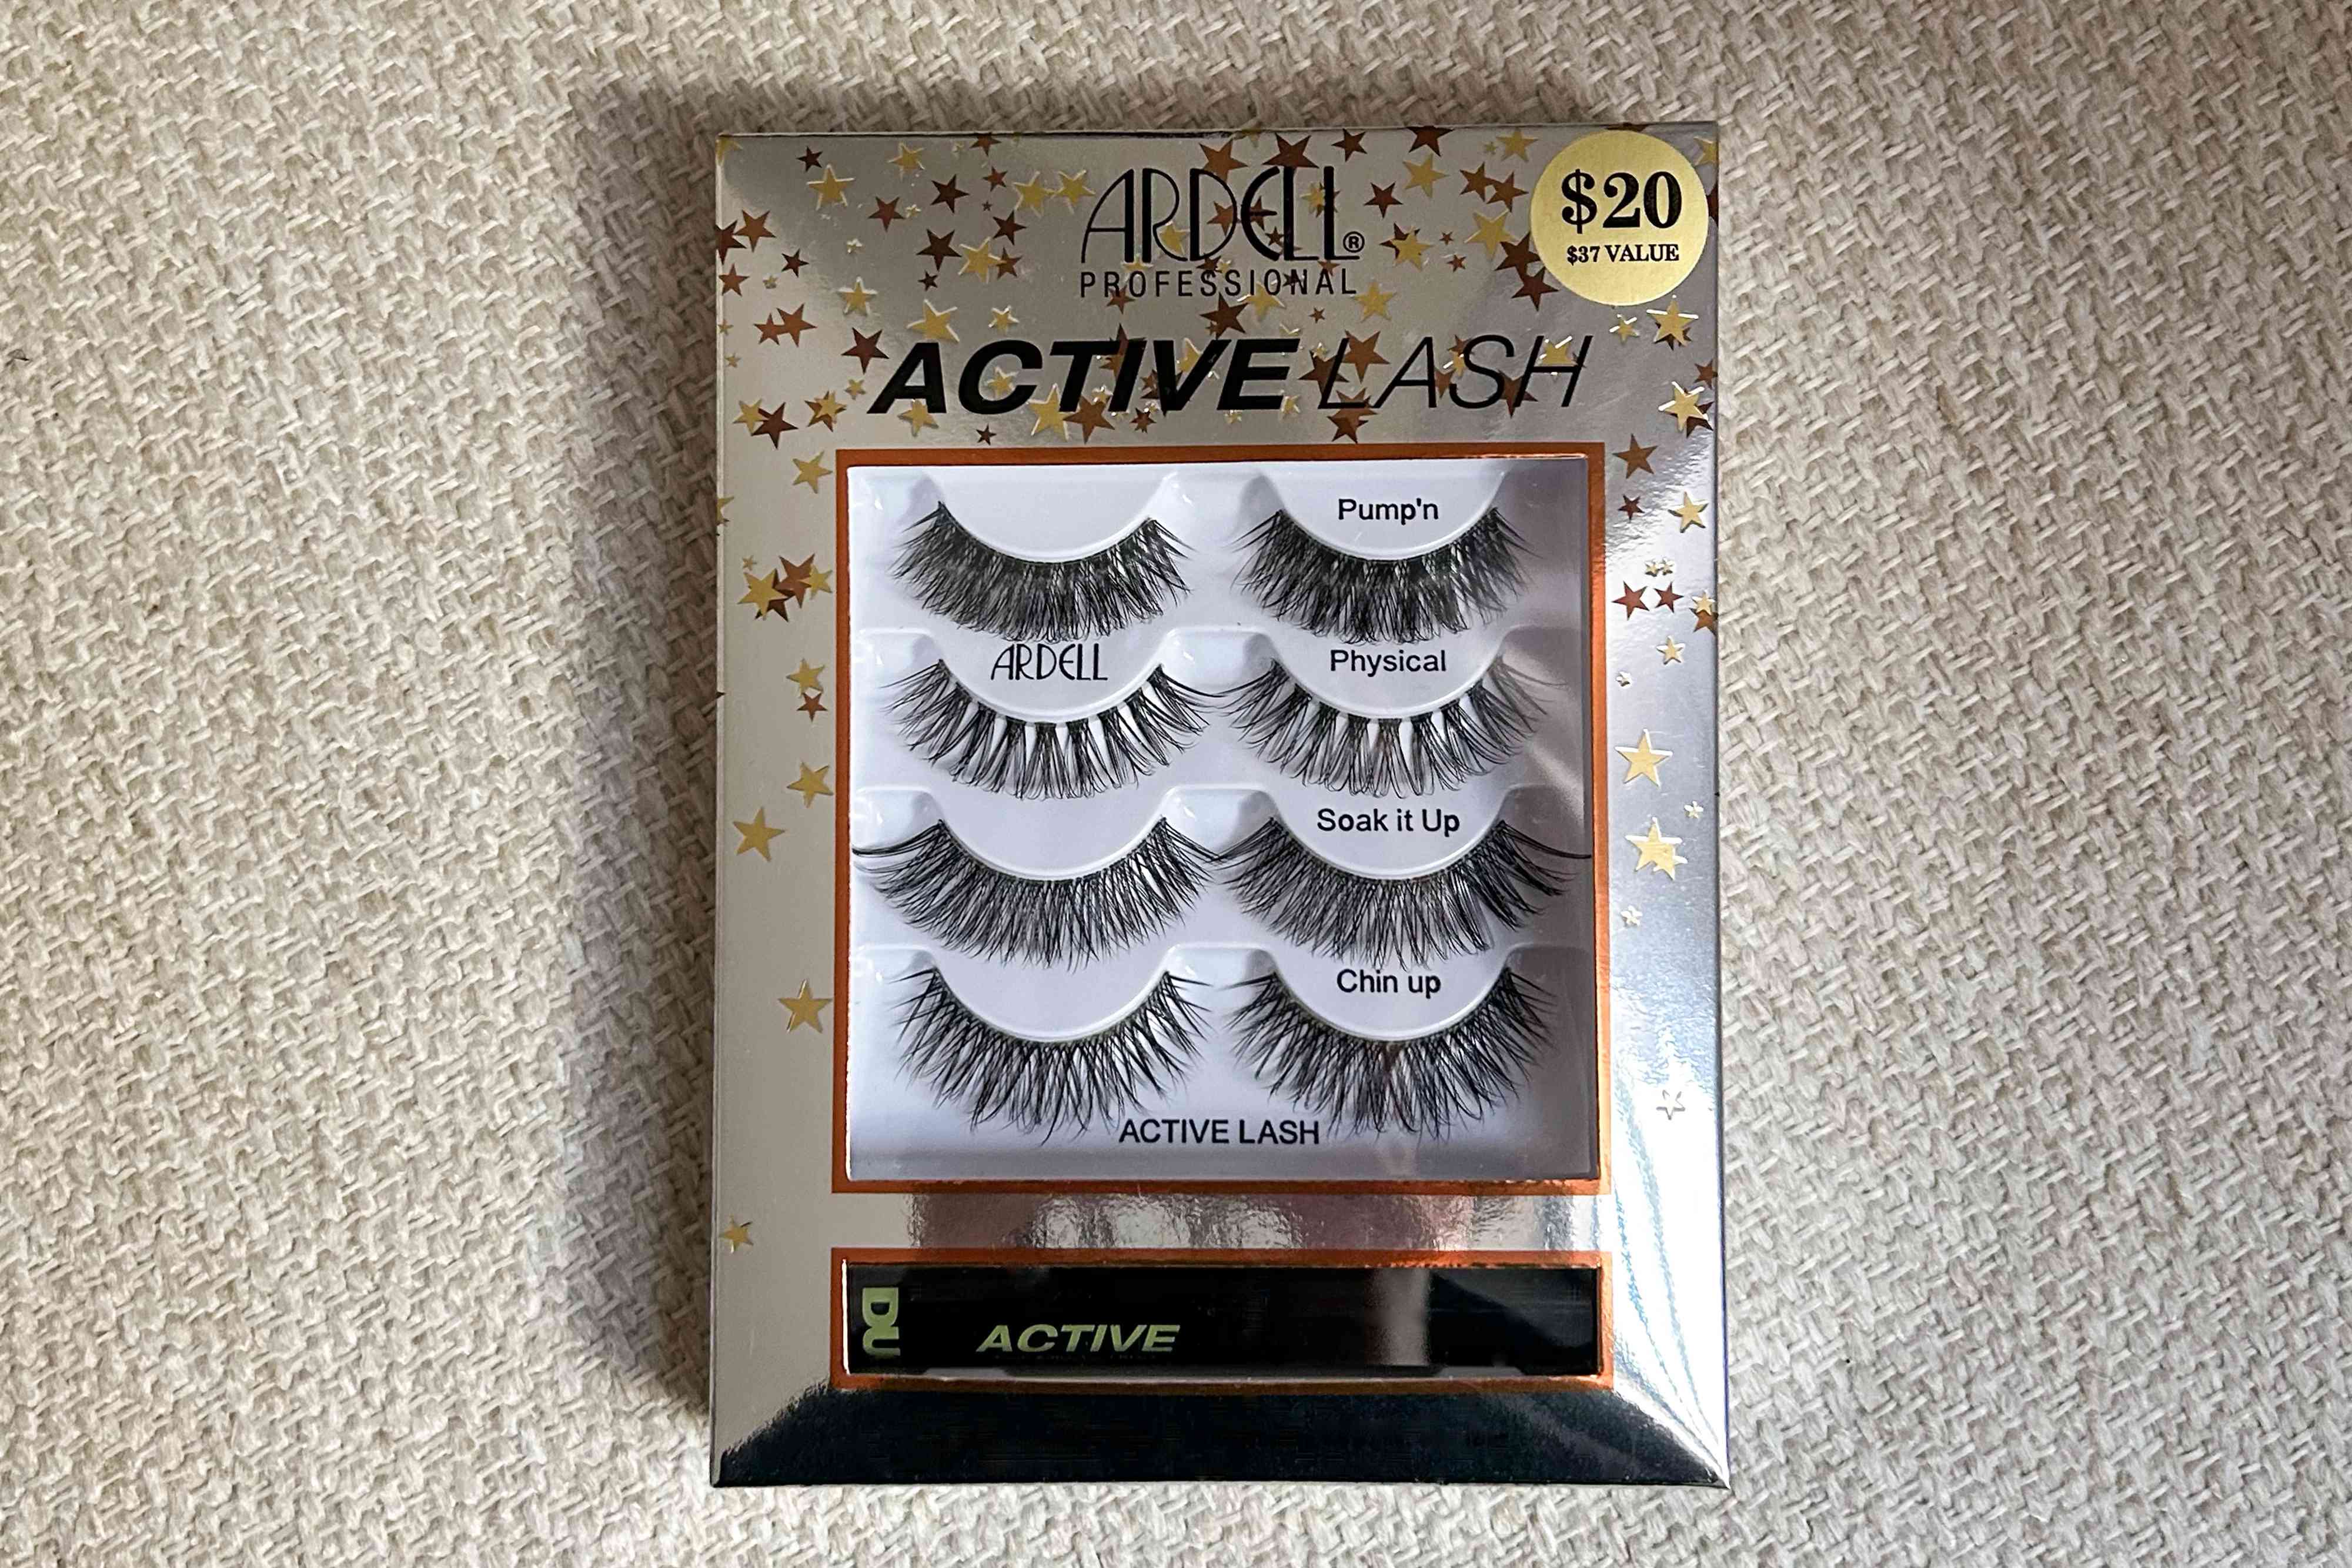 Ardell Active Lash on flat patterned surface